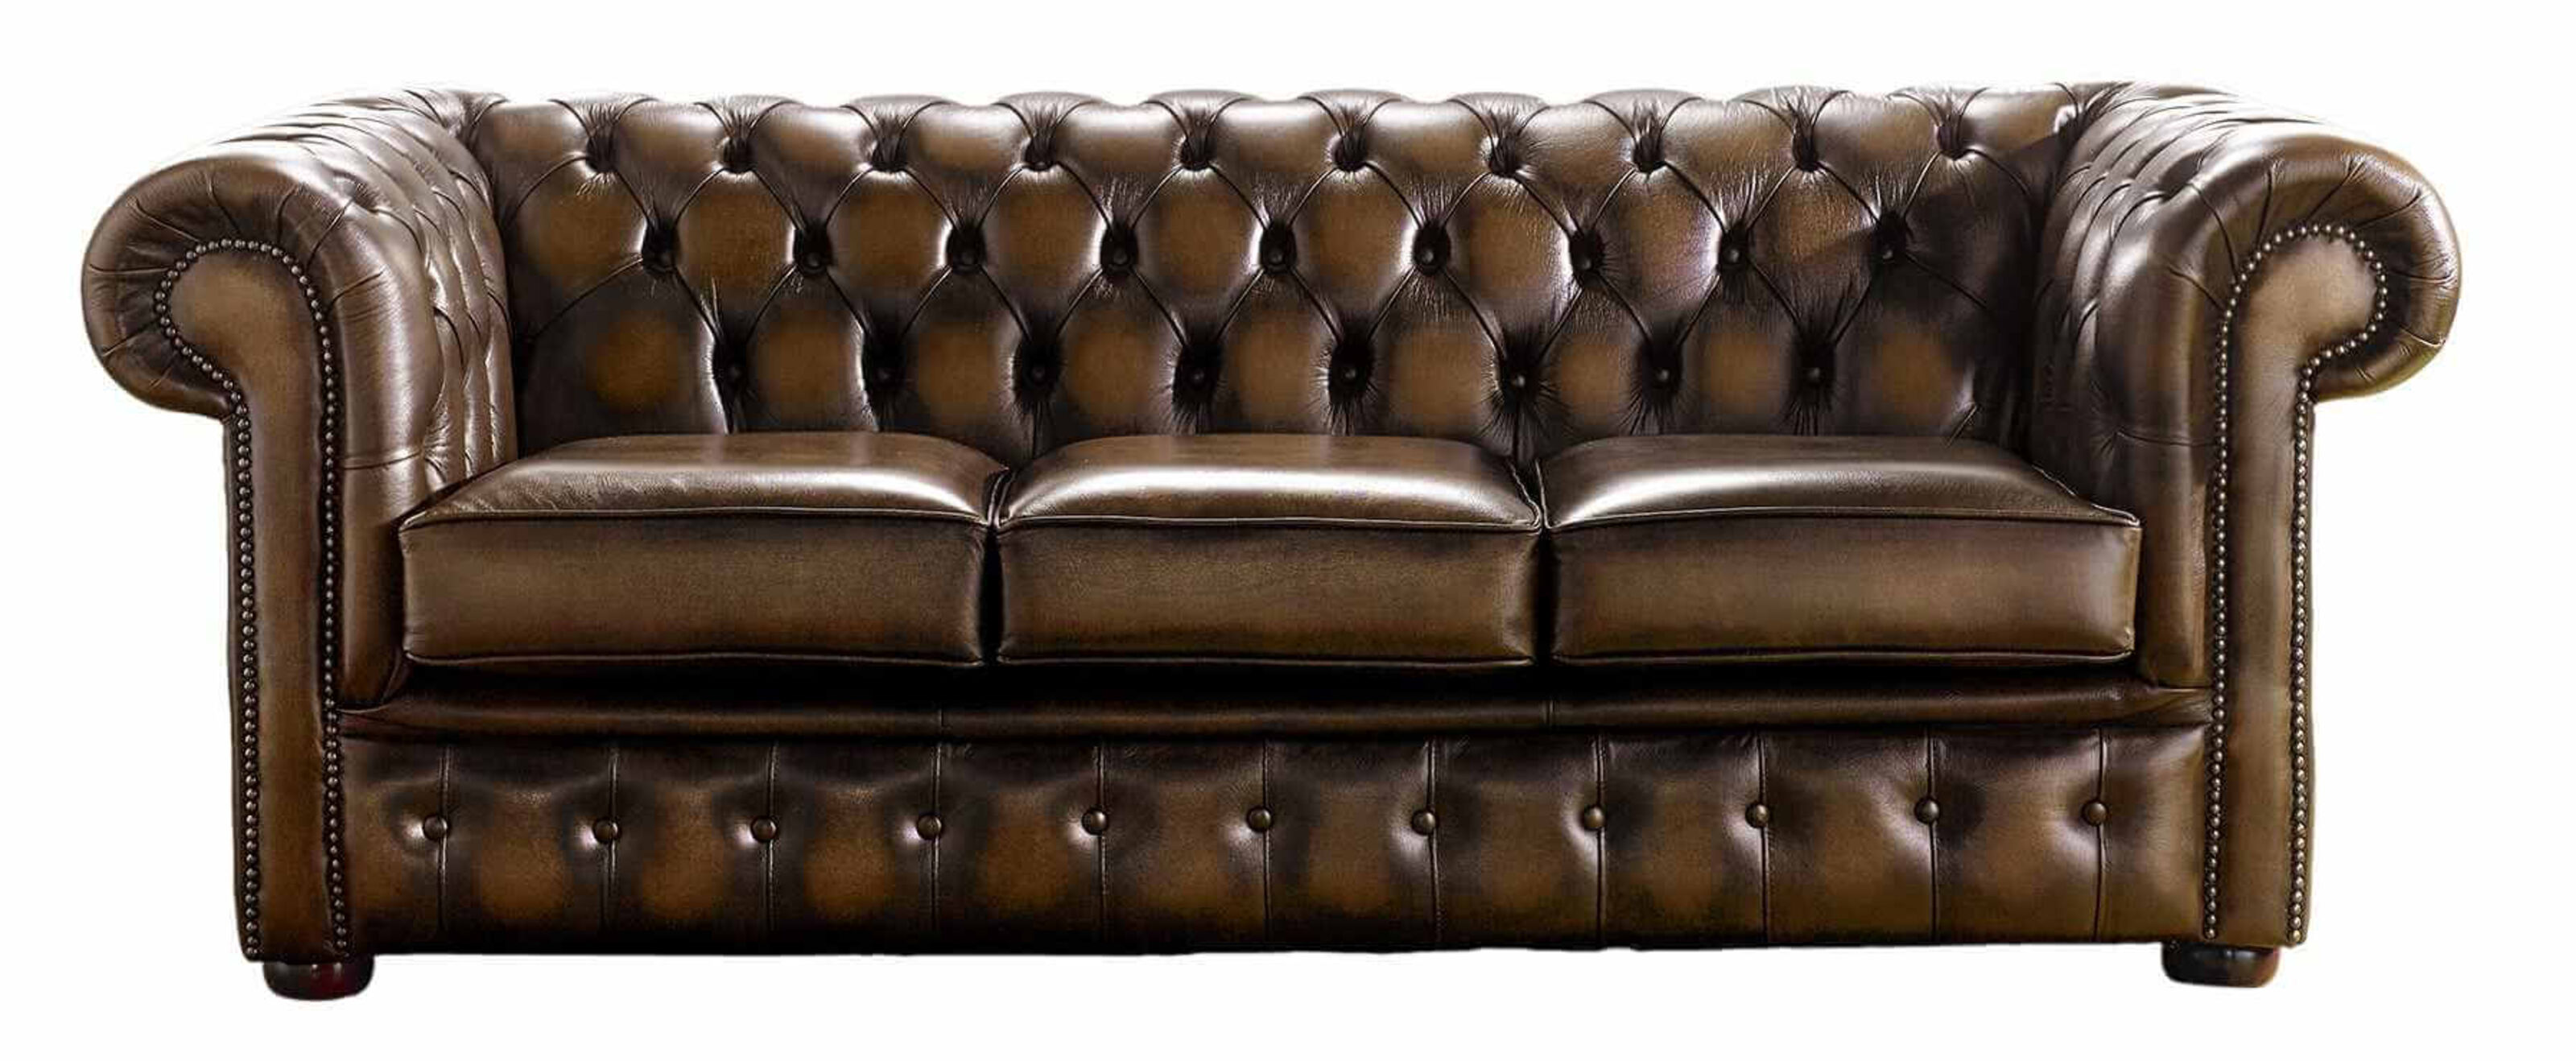 Classic Charm A Guide to Chesterfield Sofa Feet Styles  %Post Title